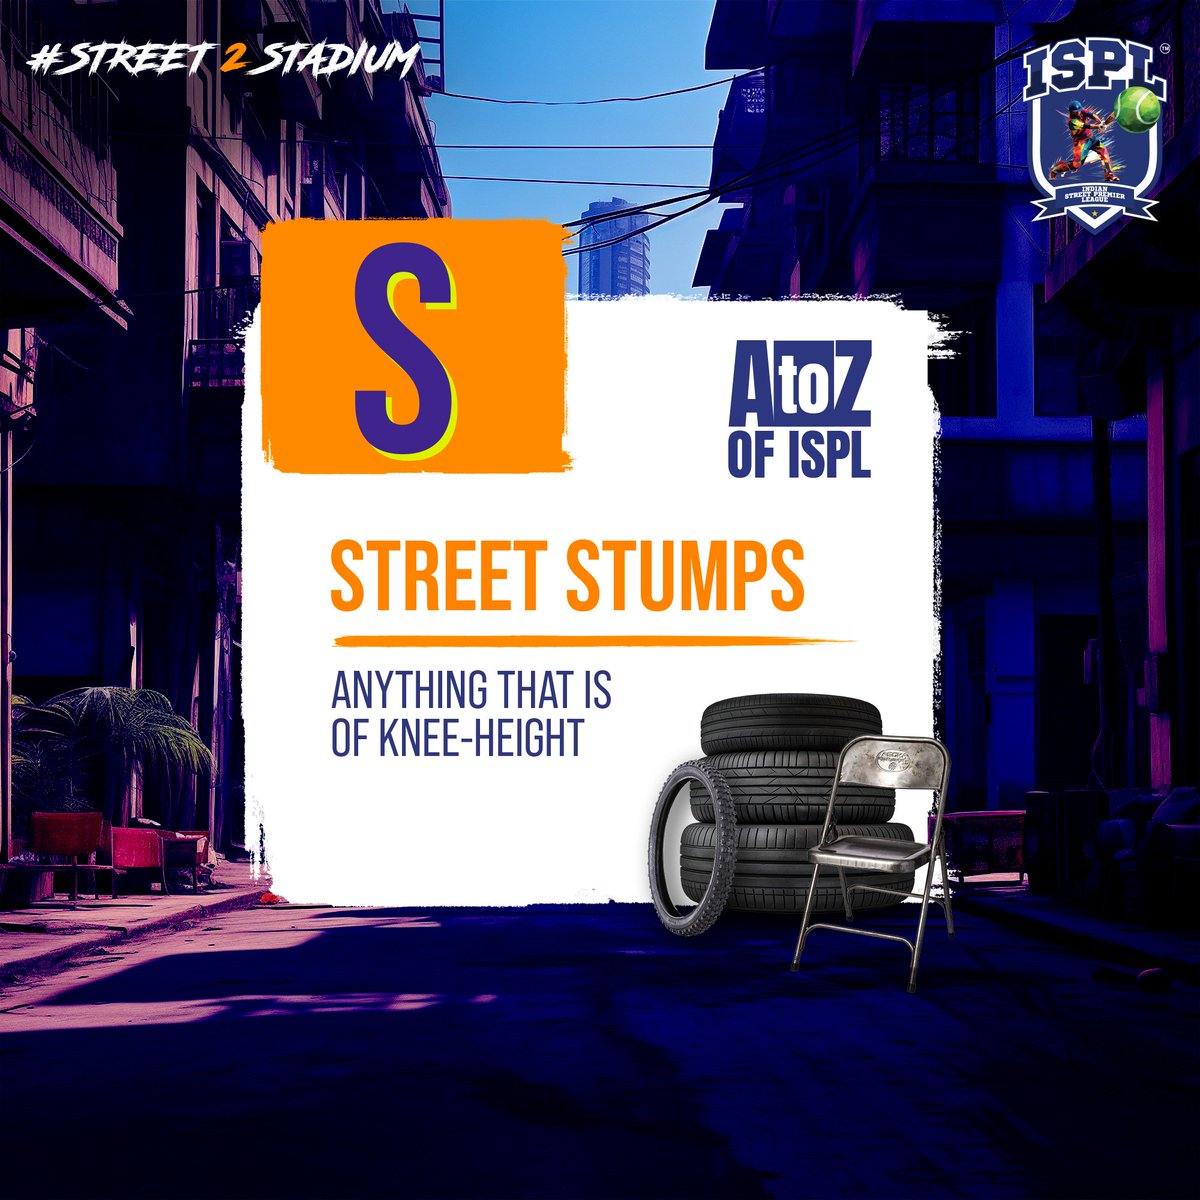 Rubber tyres, chairs, plank, tree-marking, bins… you name it, we use it as the jugaad for stumps in gully cricket. #Street2Stadium #ISPL #NewT10Era #EvoluT10n #ZindagiBadalLo